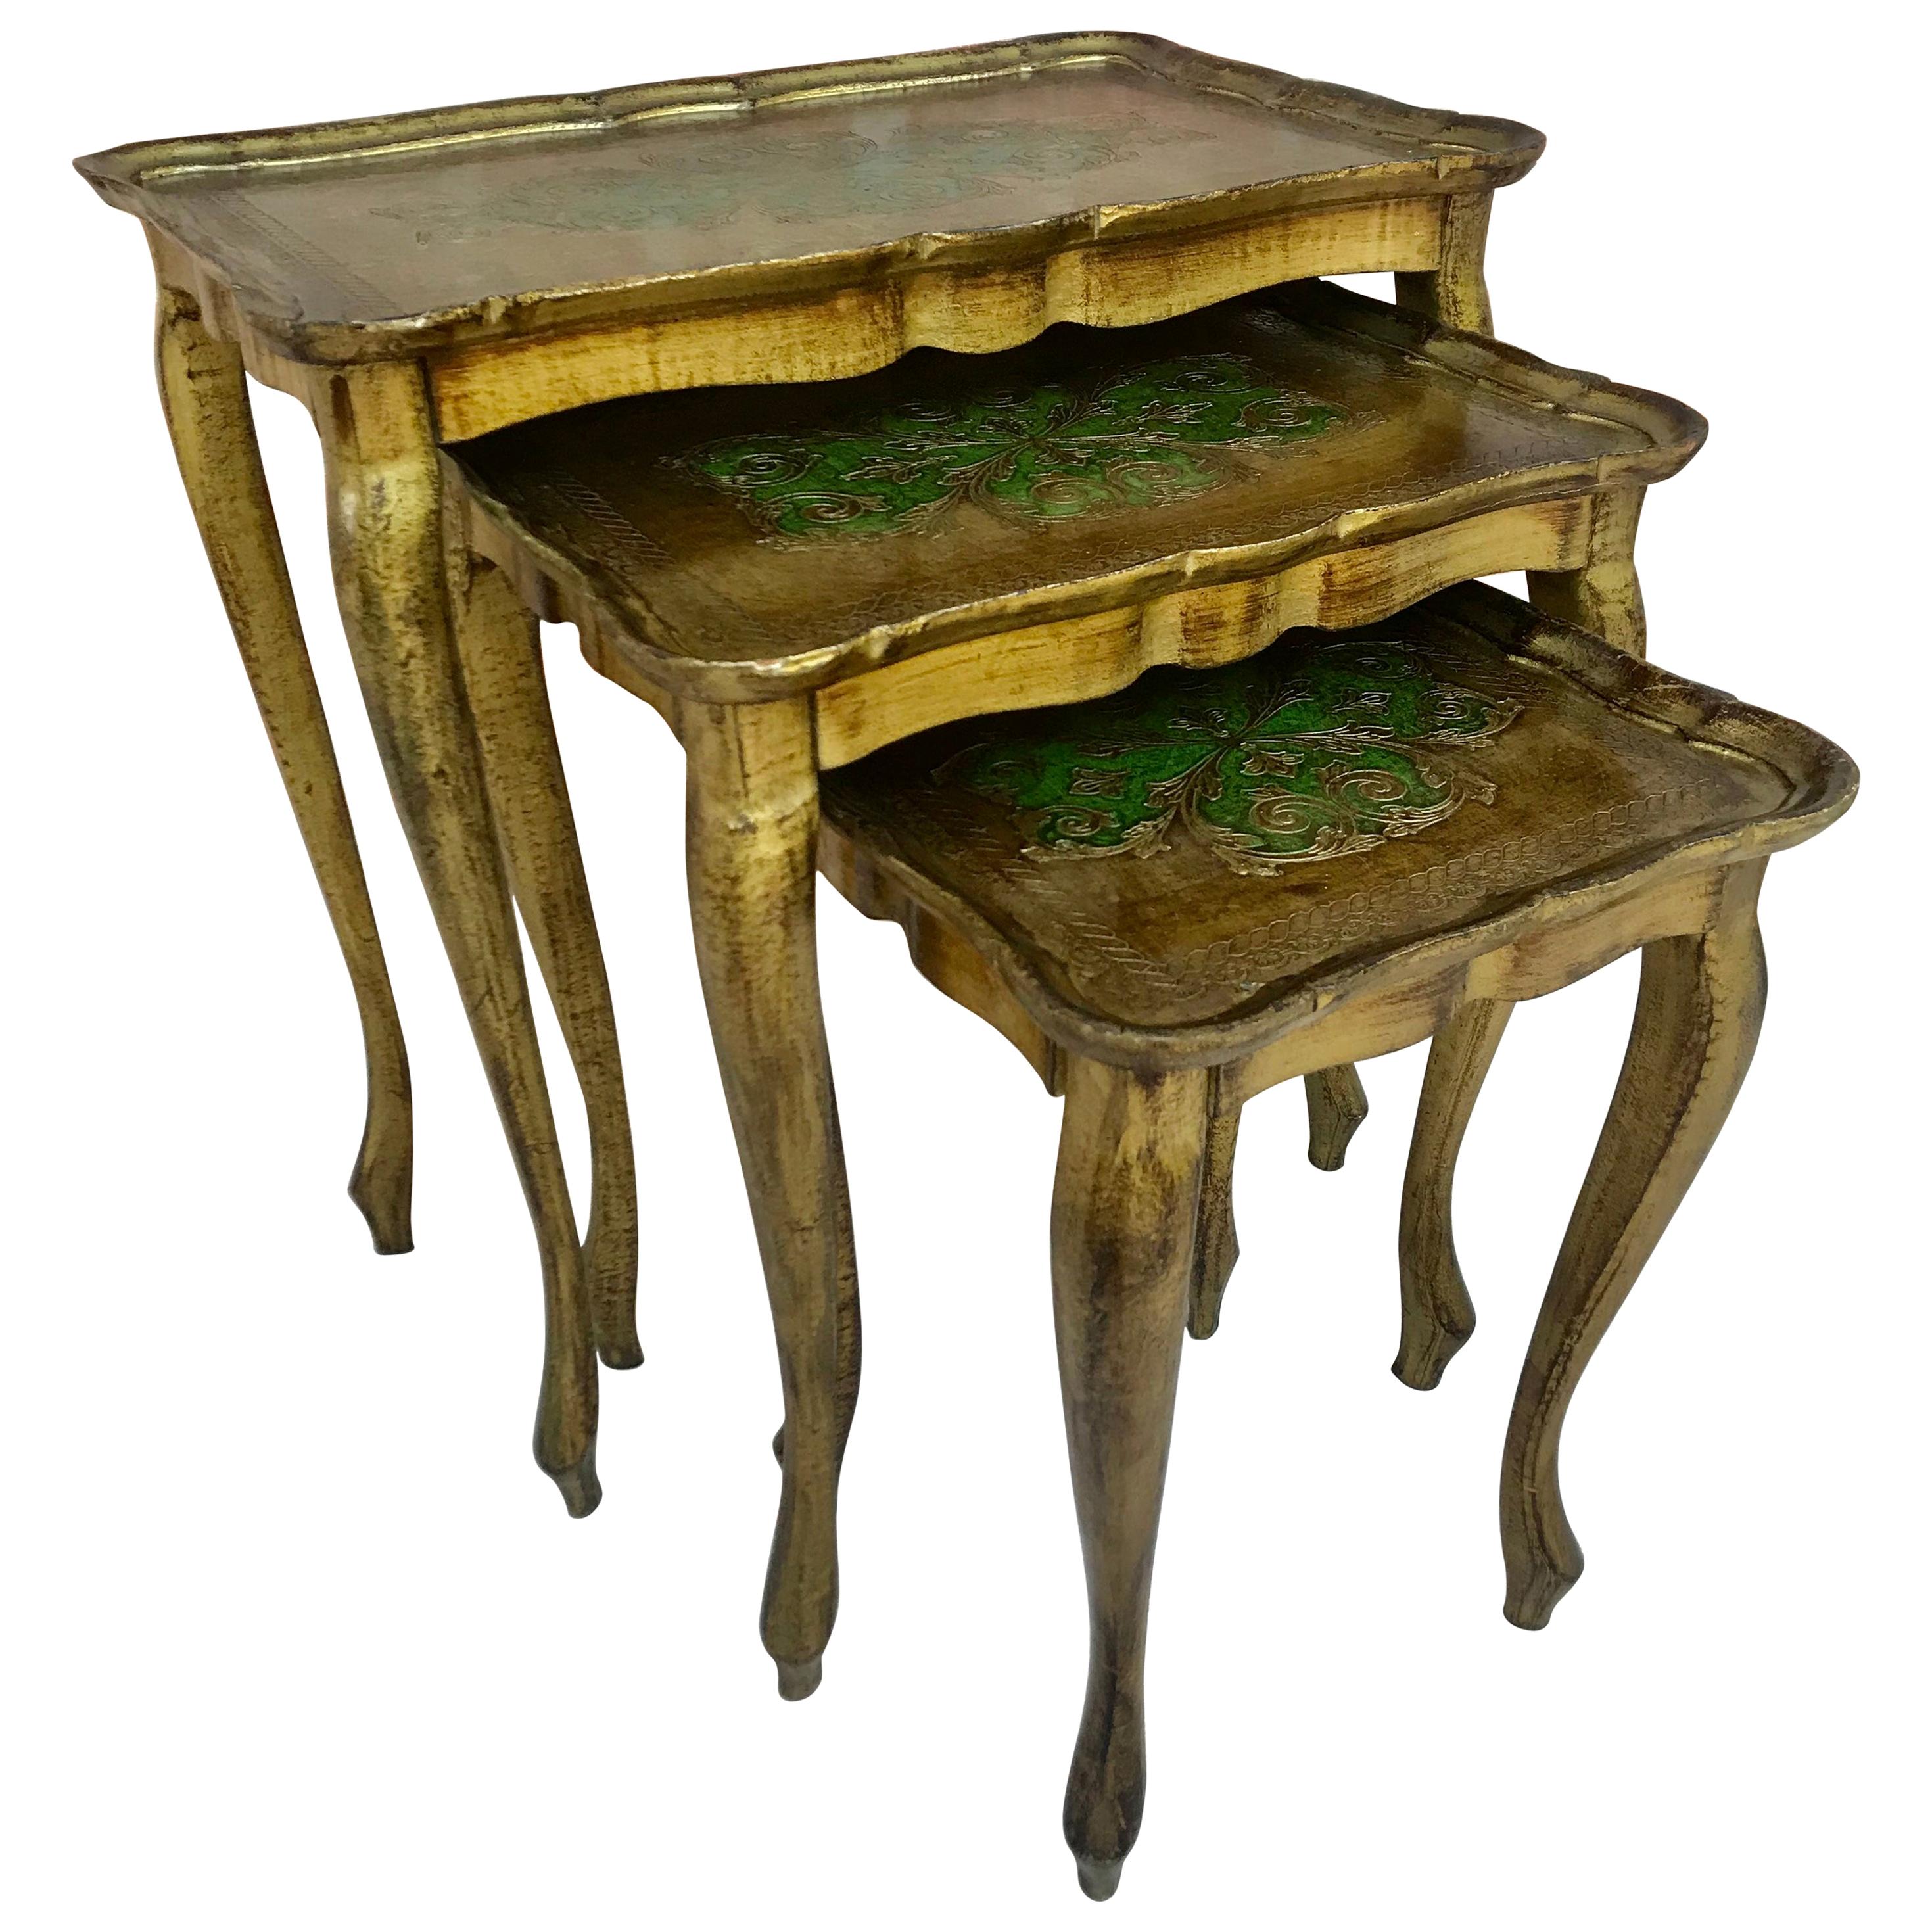 20th Century Nest of 3 Giltwood and Carved Side Tables with Cabriole Shaped Legs